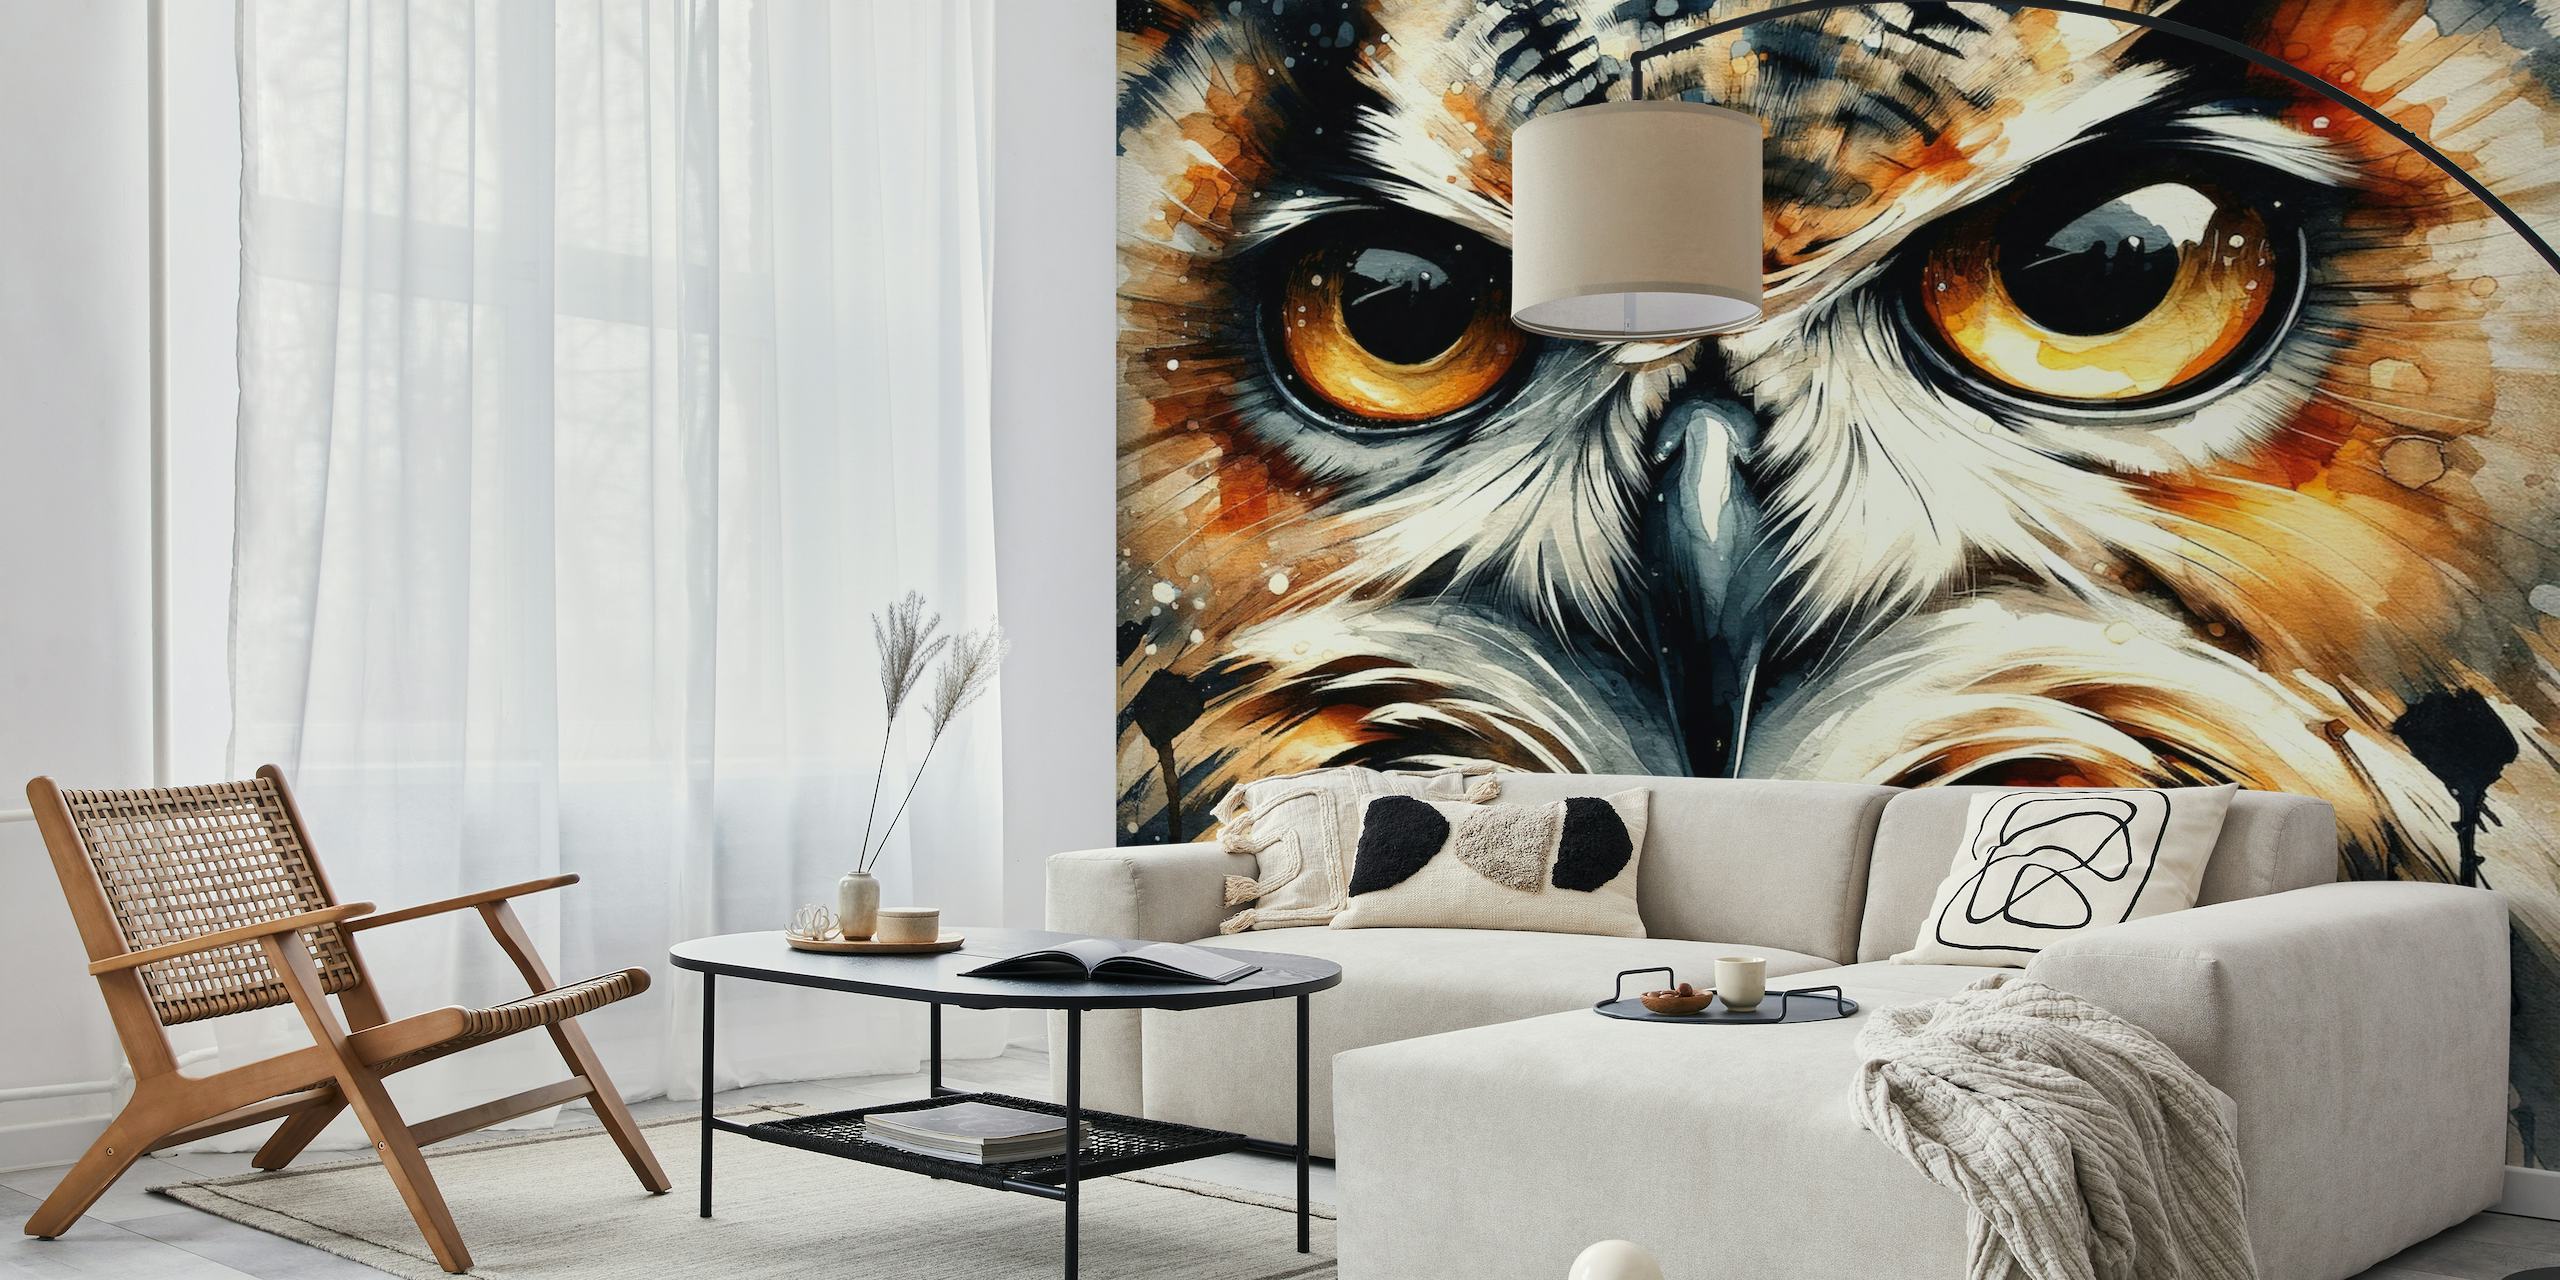 Striking owl wall mural with intense gaze and detailed feathers